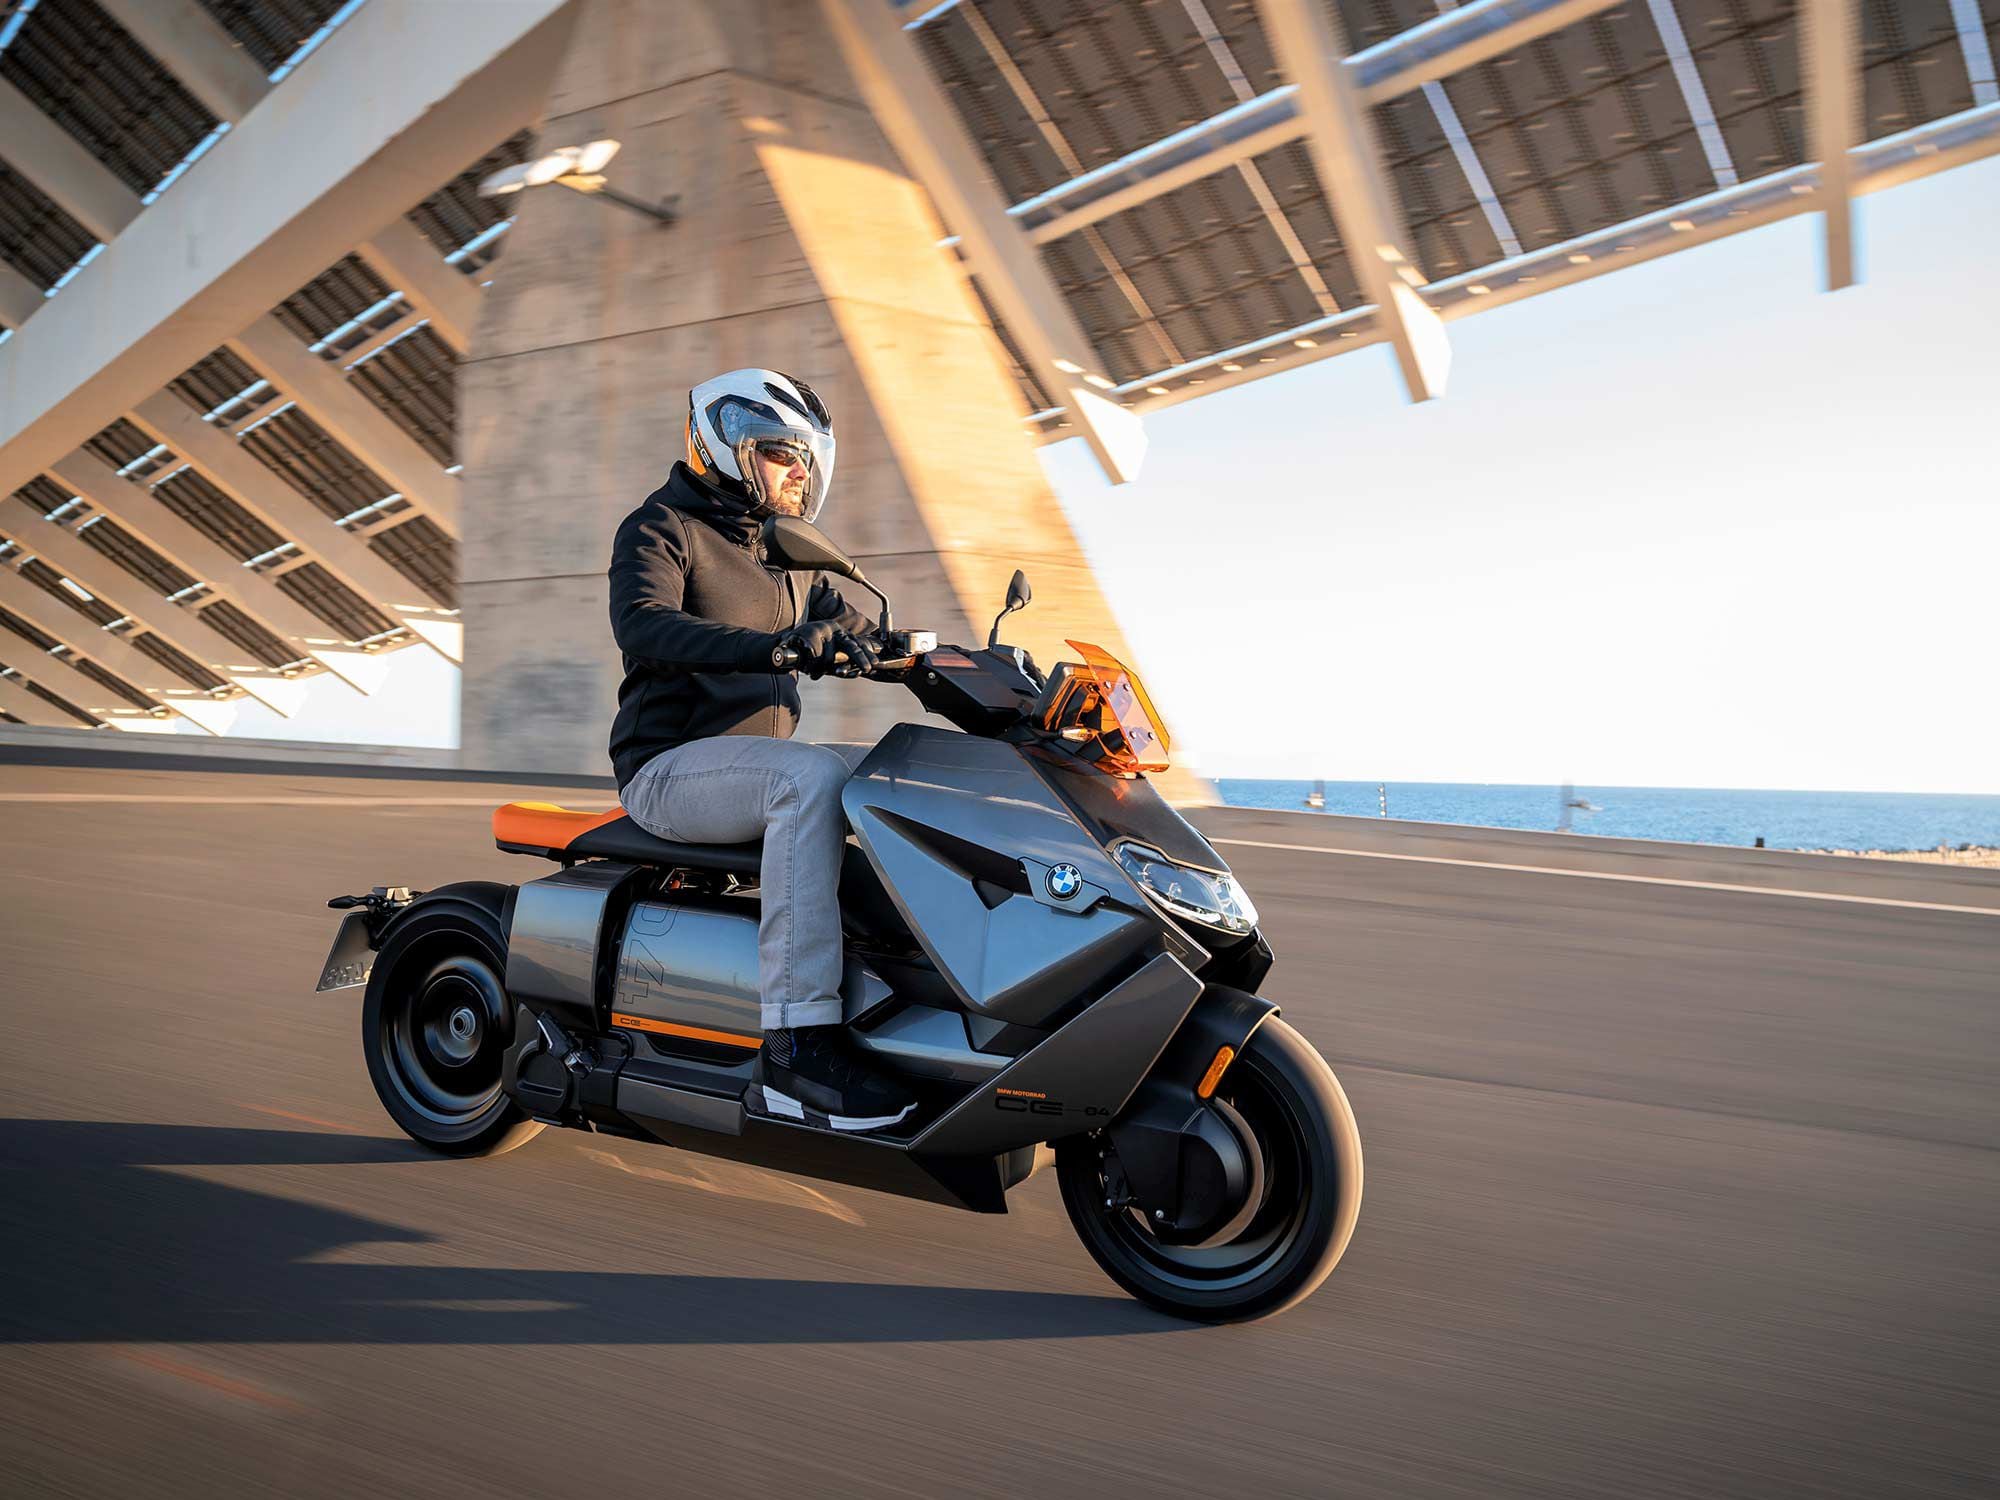 BMW’s new, boldly styled CE 04 looks straight out of a sci-fi movie, but it’s aimed squarely at today’s emissions-conscious city commuters.